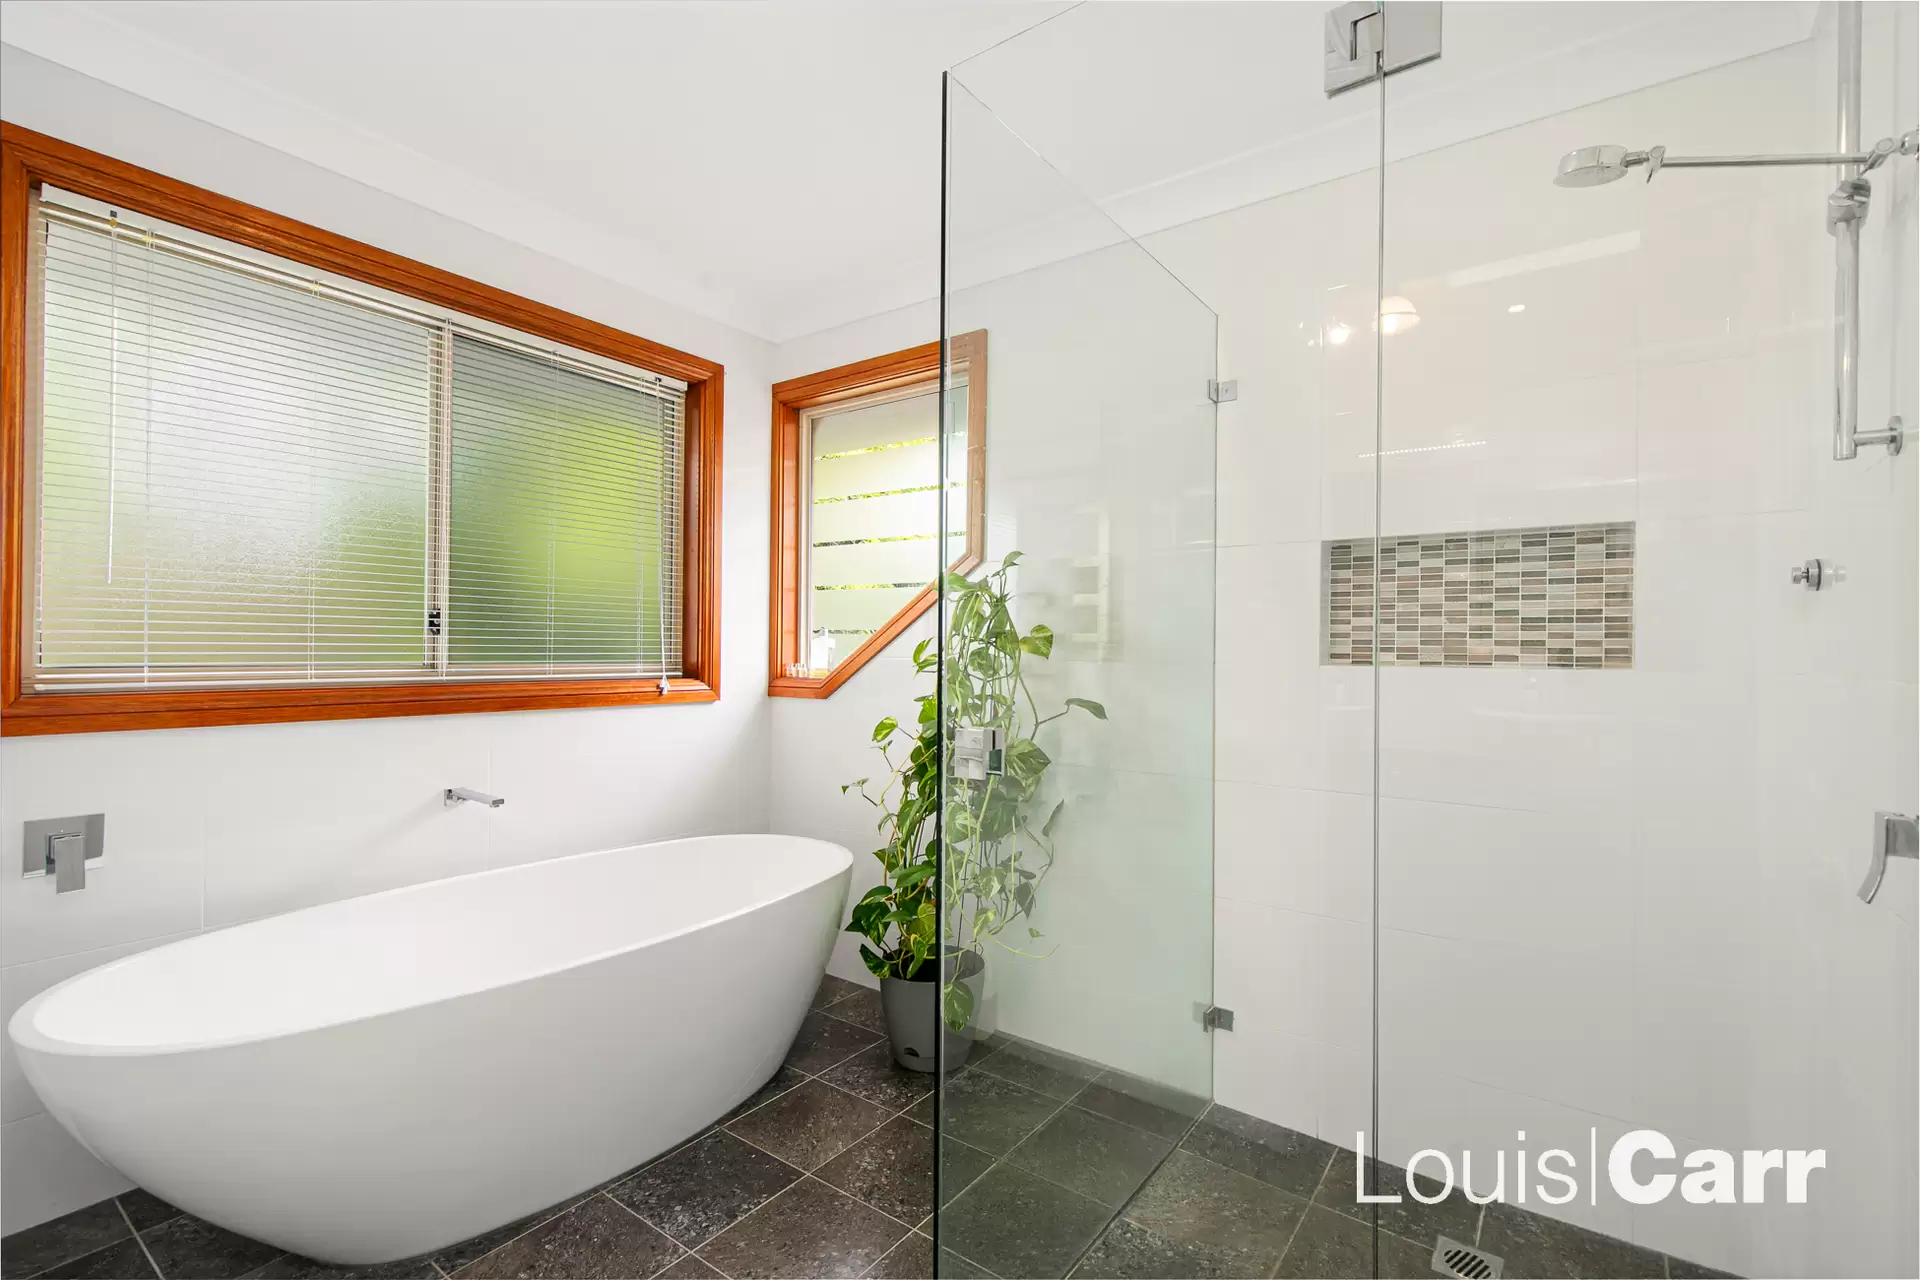 Photo #10: 15 Grangewood Place, West Pennant Hills - For Sale by Louis Carr Real Estate